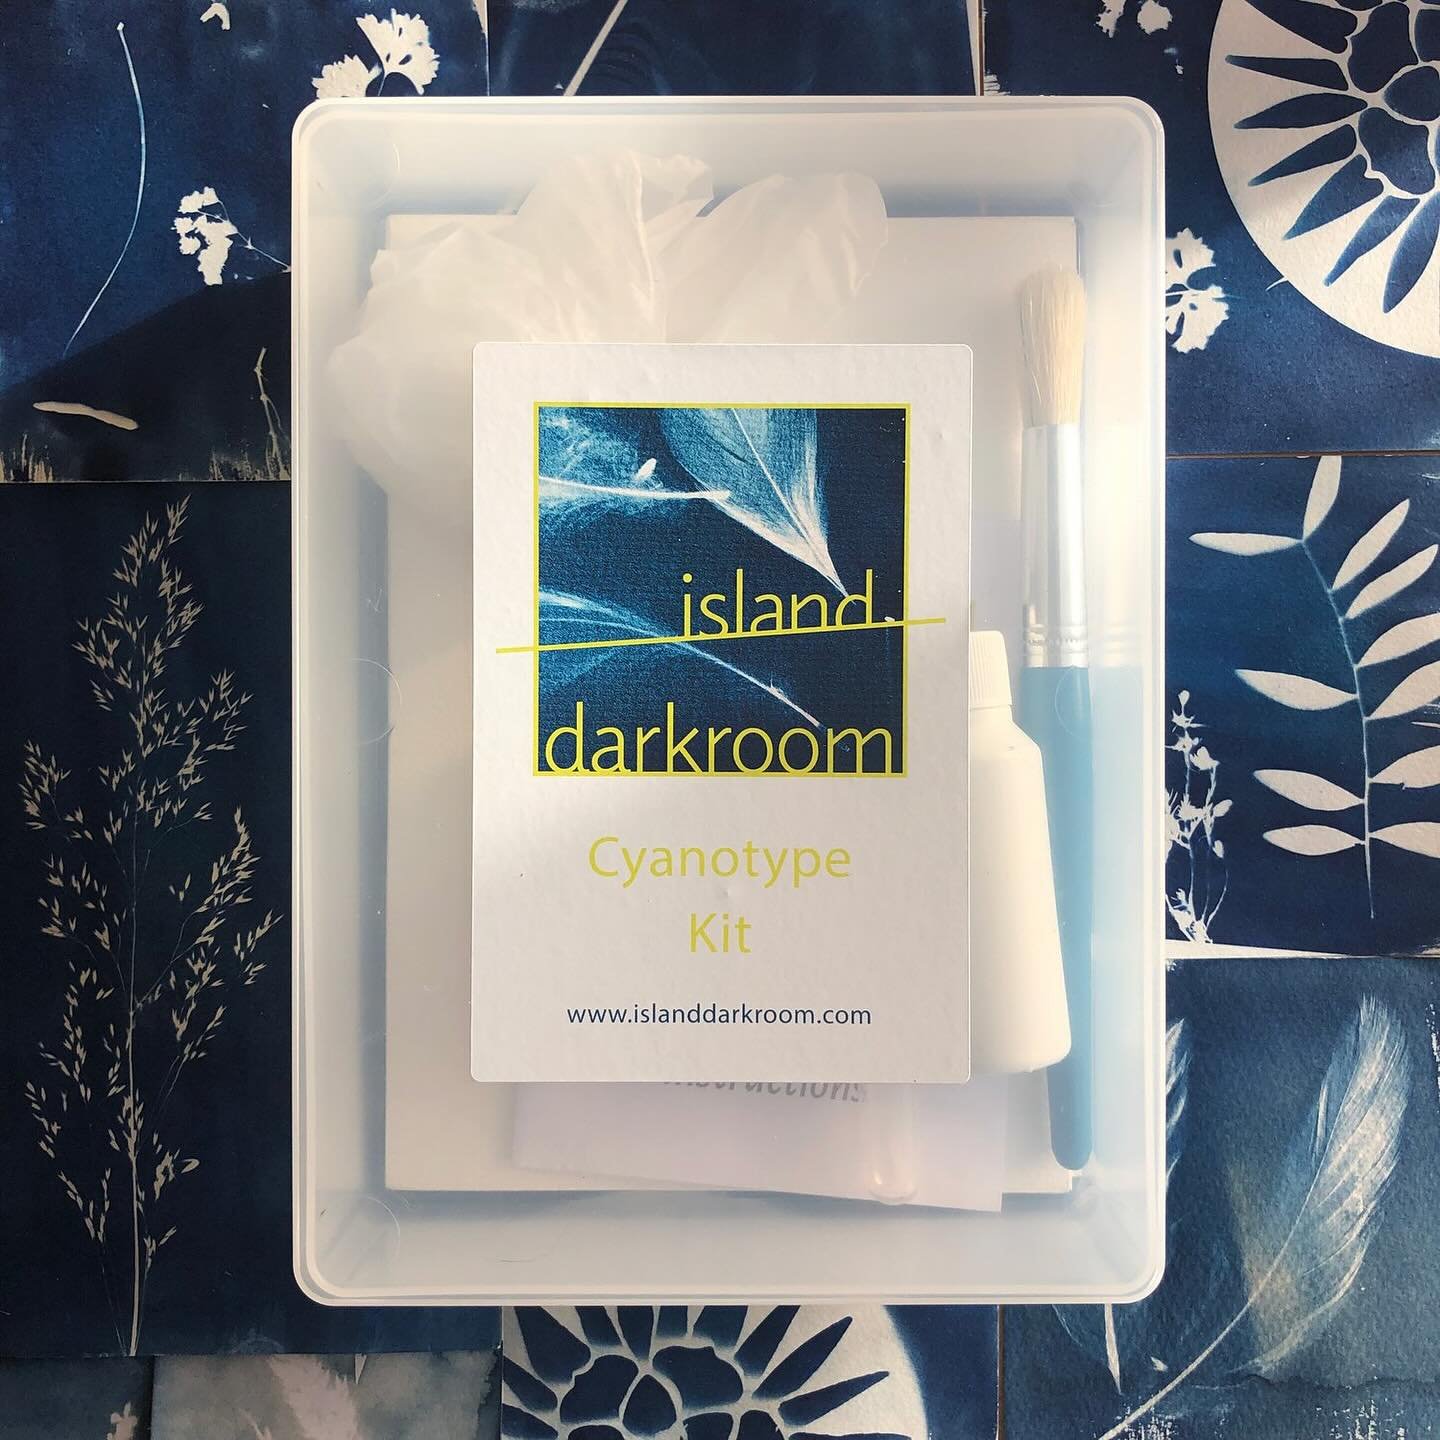 Happy Monday! ☀️ If you're looking for a fun wee activity on this GLORIOUS day in the Hebrides, why not stop by Island Darkroom and pick up a Cyanotype Kit so you can make your own beautiful blue sun prints?! 

Great to do with kids, these handy litt